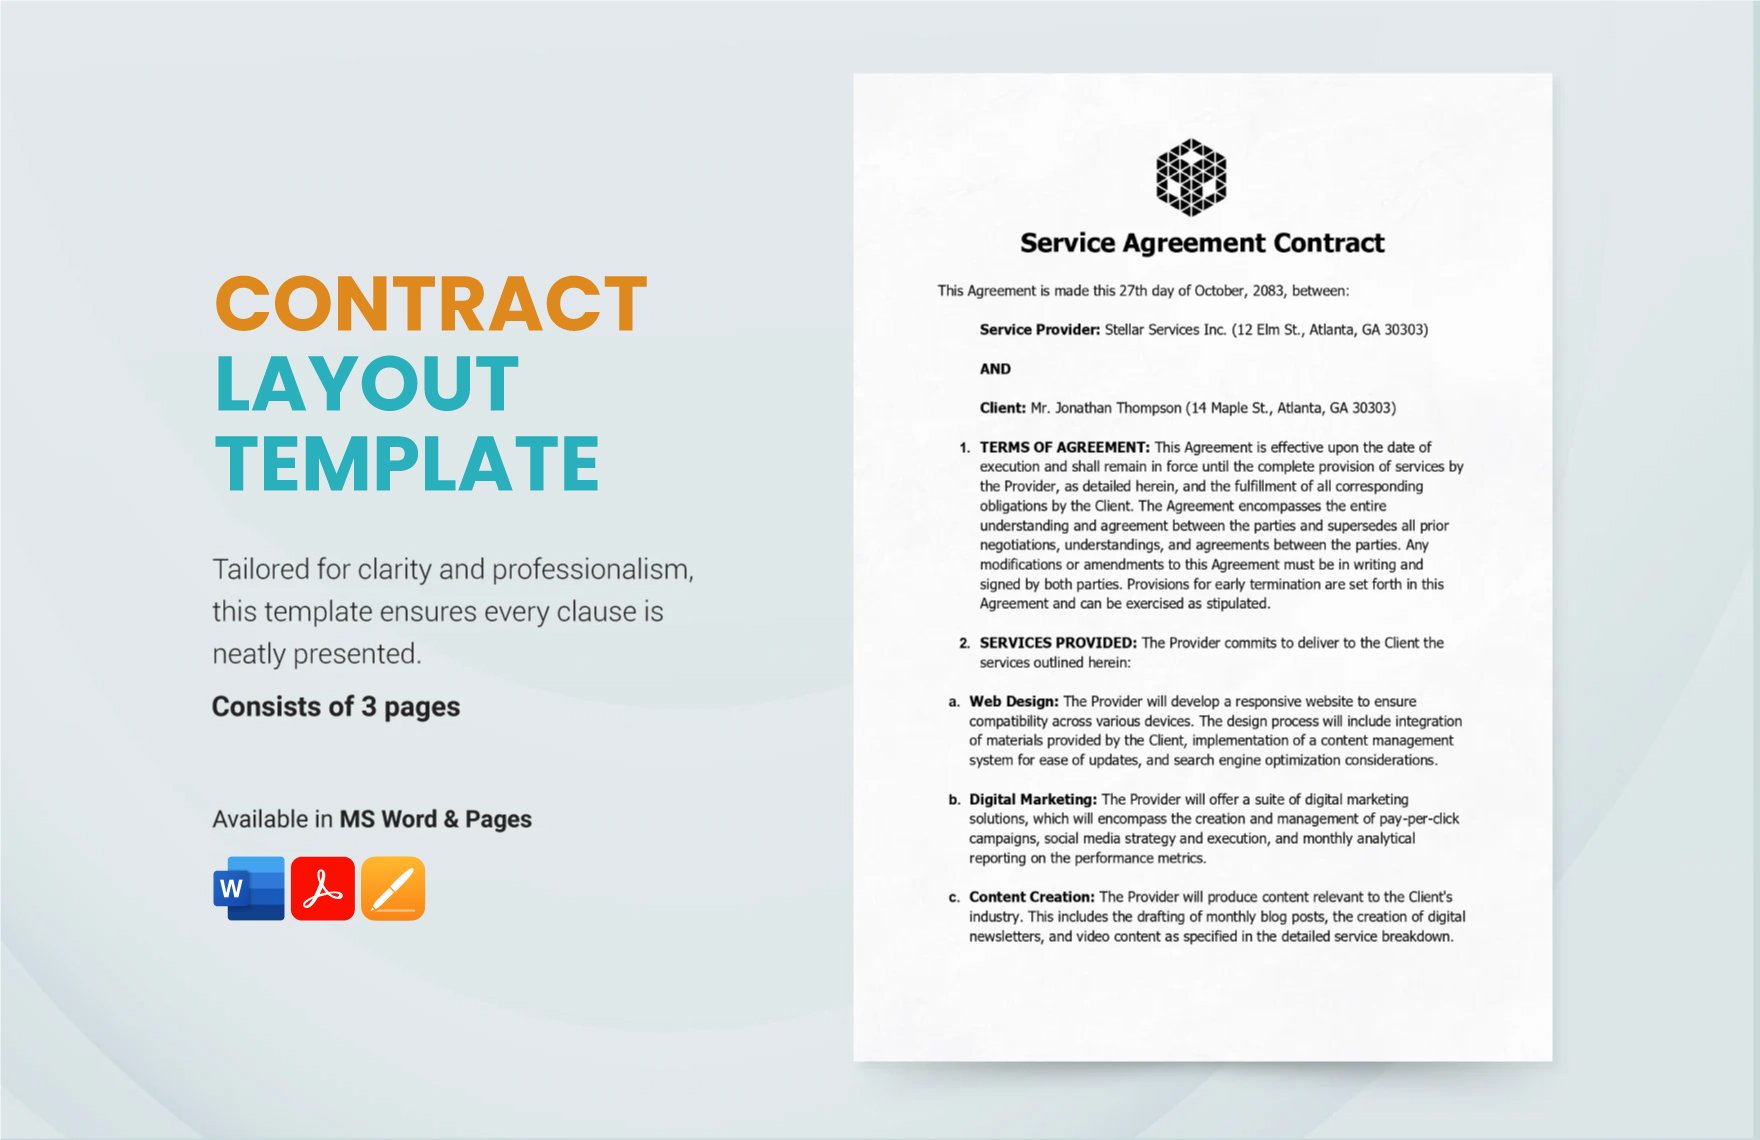 Free Contract Layout Template in Word, PDF, Apple Pages